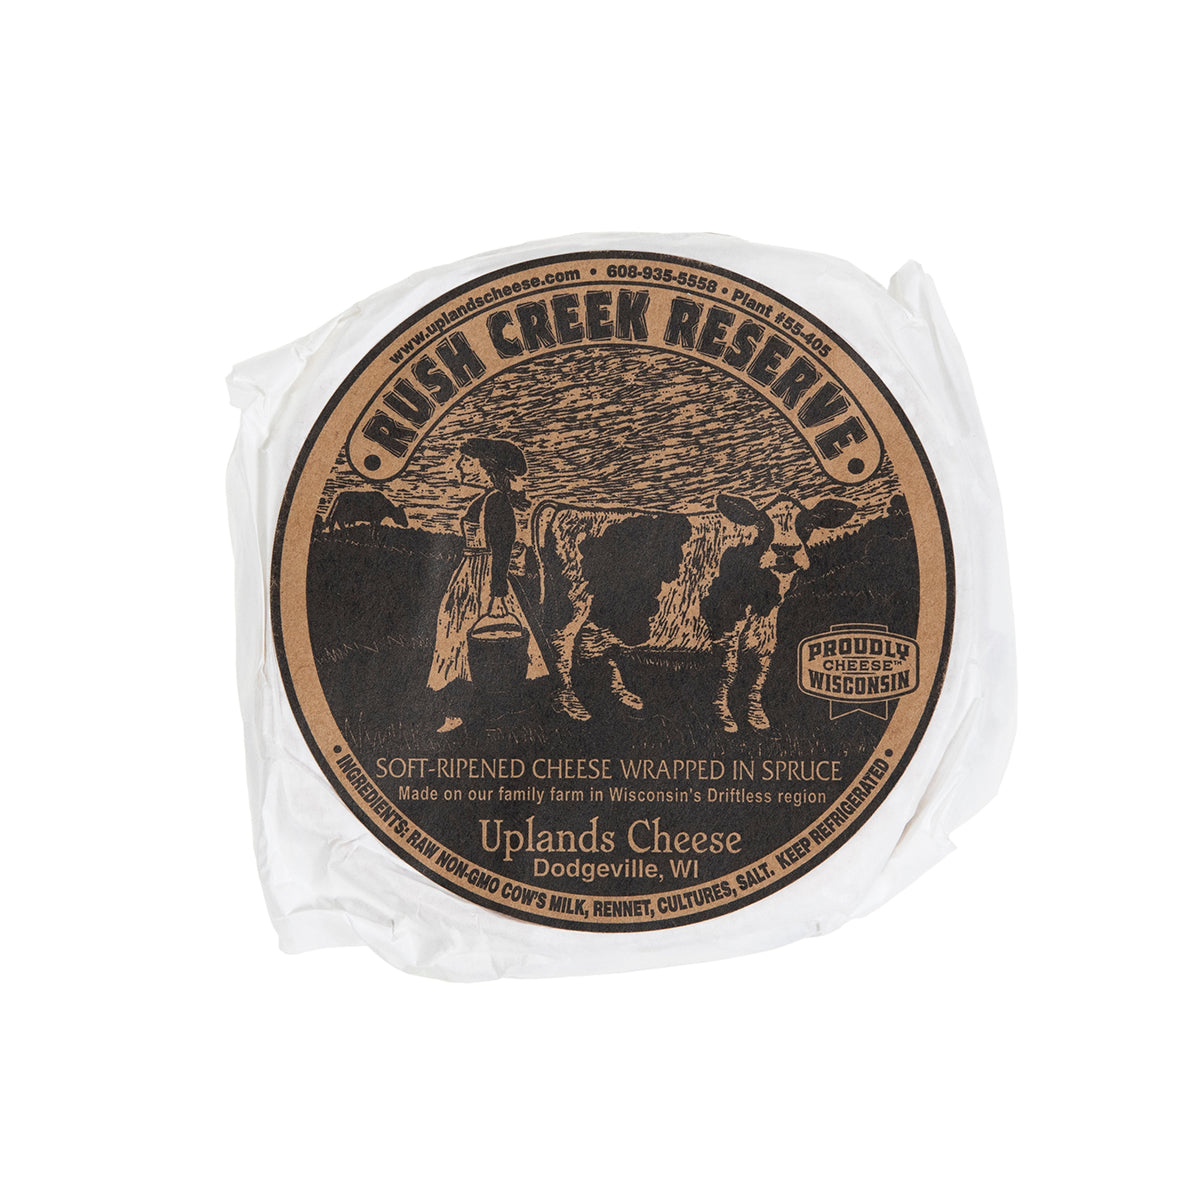 Uplands Cheese Company Rush Creek Reserve Cheese